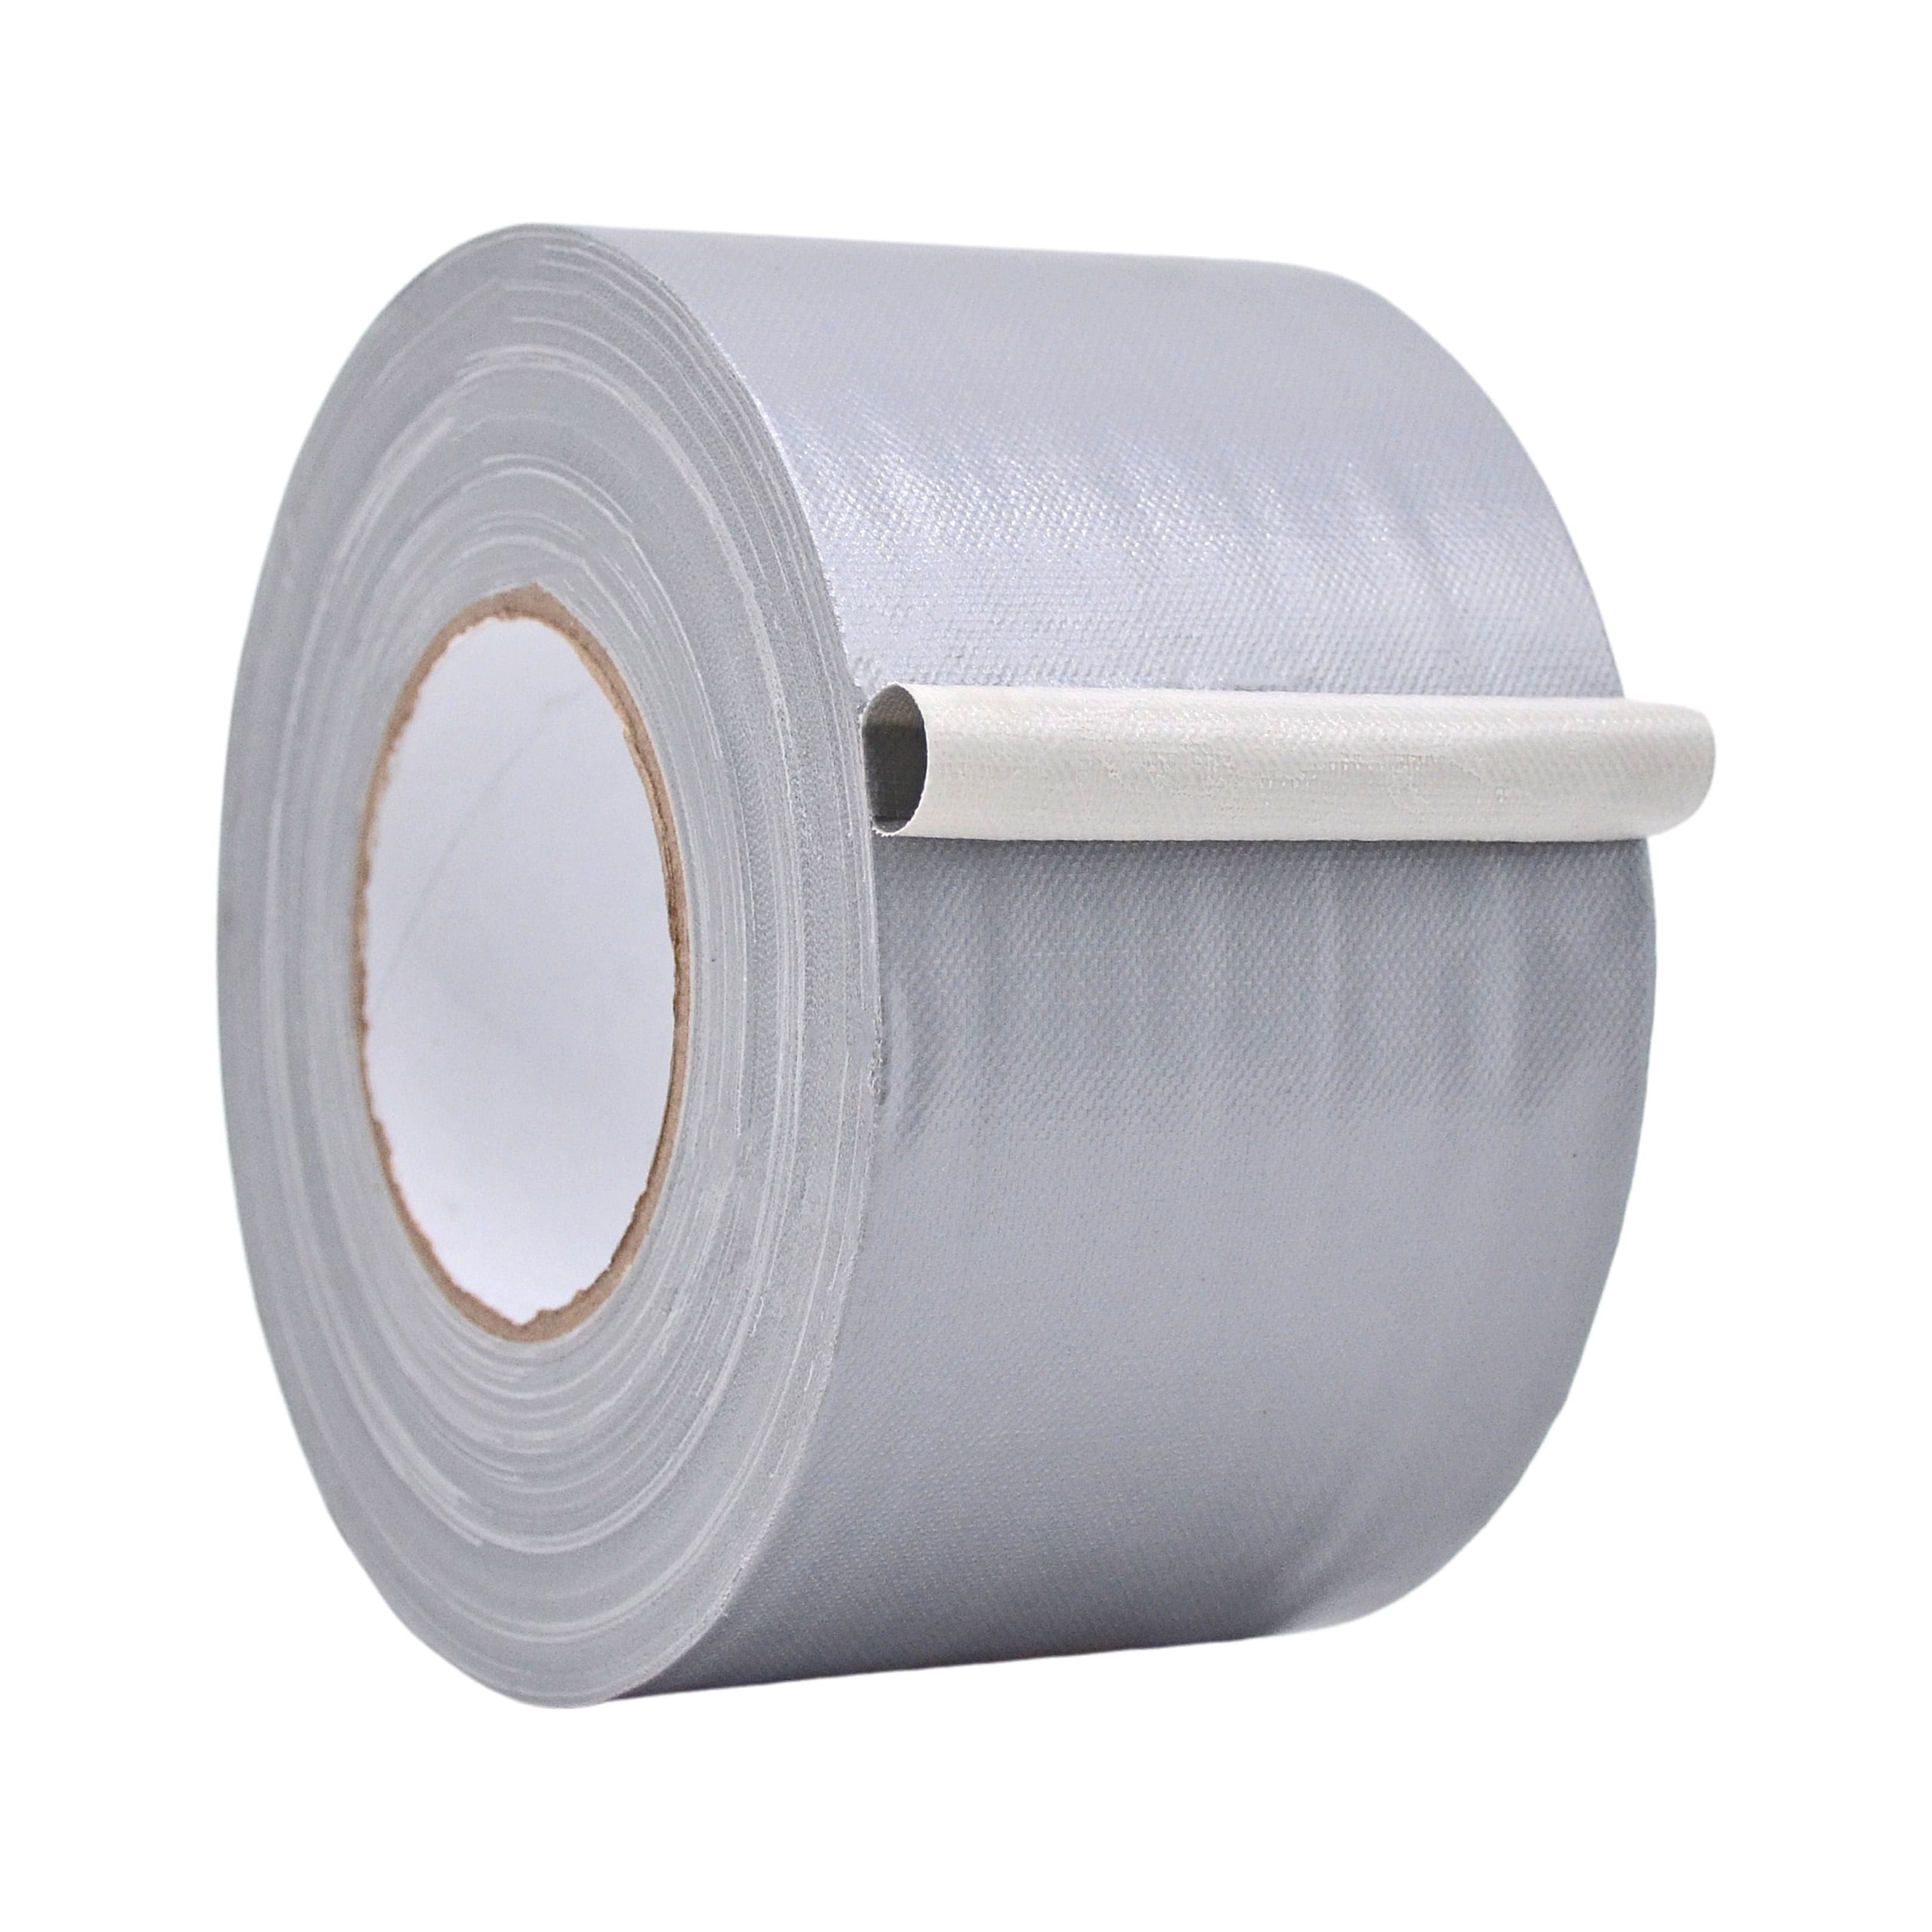 WOD DTC10 Advanced Strength Industrial Grade White Duct Tape, 4 inch x 60  yds. Waterproof, UV Resistant For Crafts & Home Improvement